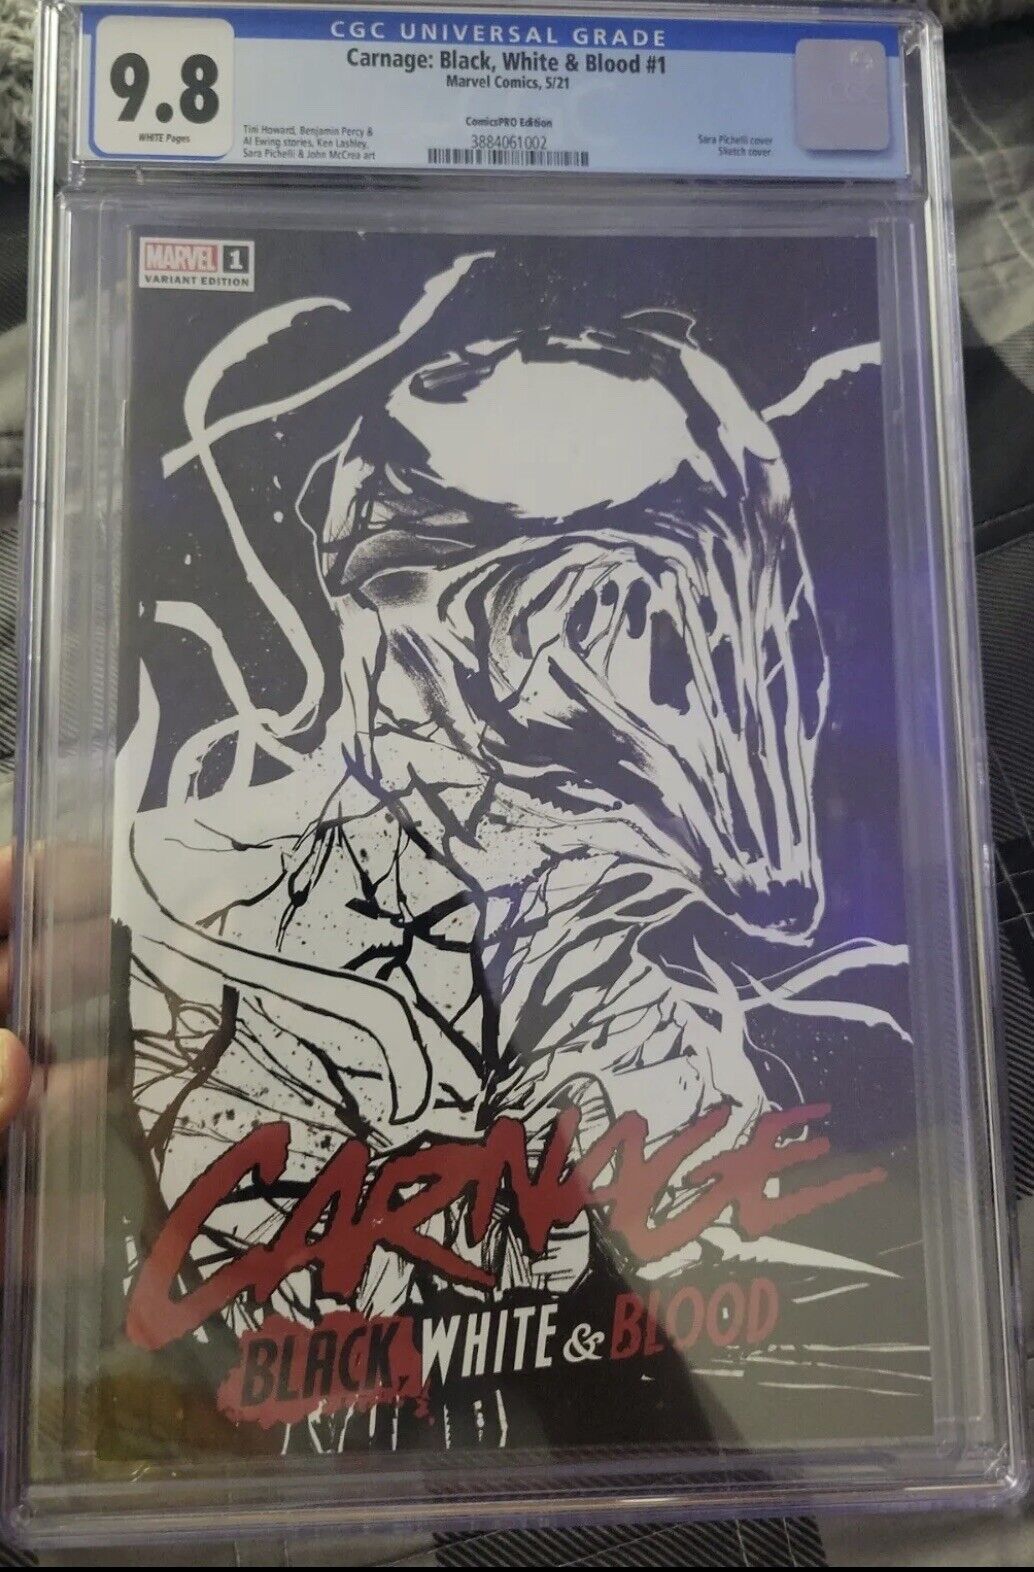 CARNAGE BLACK WHITE AND BLOOD 1 CGC 9.8 COMICS PRO EDITION MARVEL Variant 2021